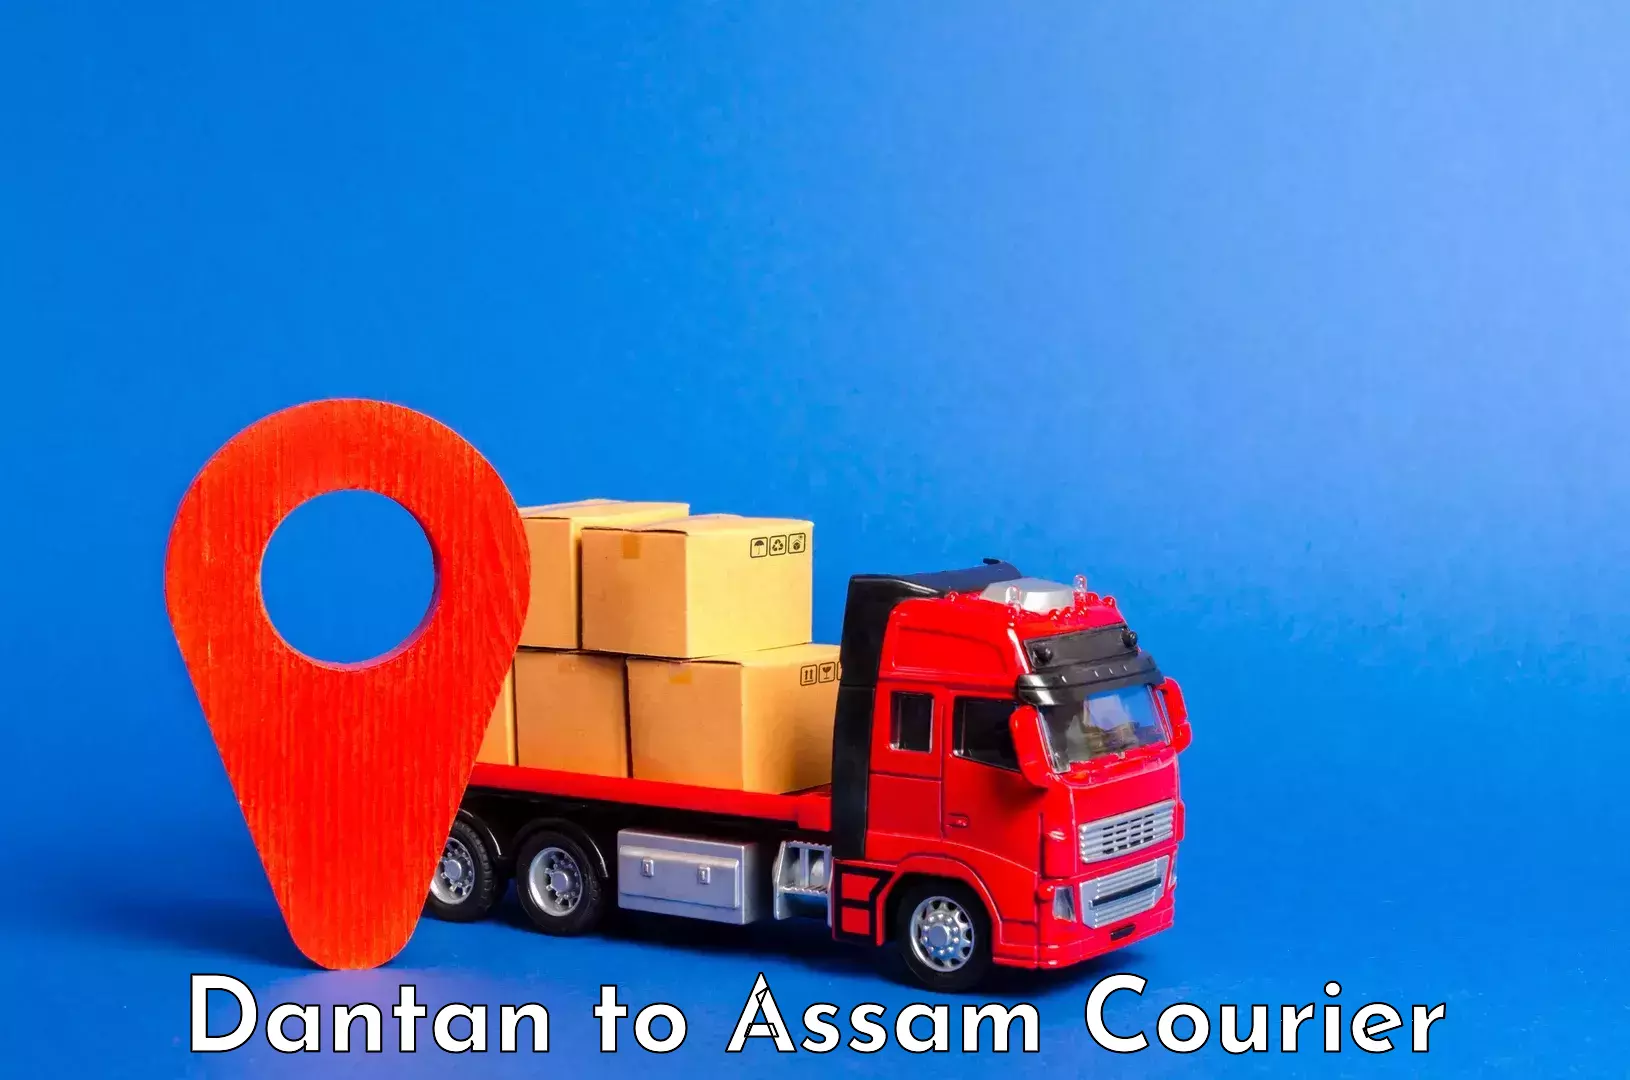 Luggage transport consulting Dantan to Assam